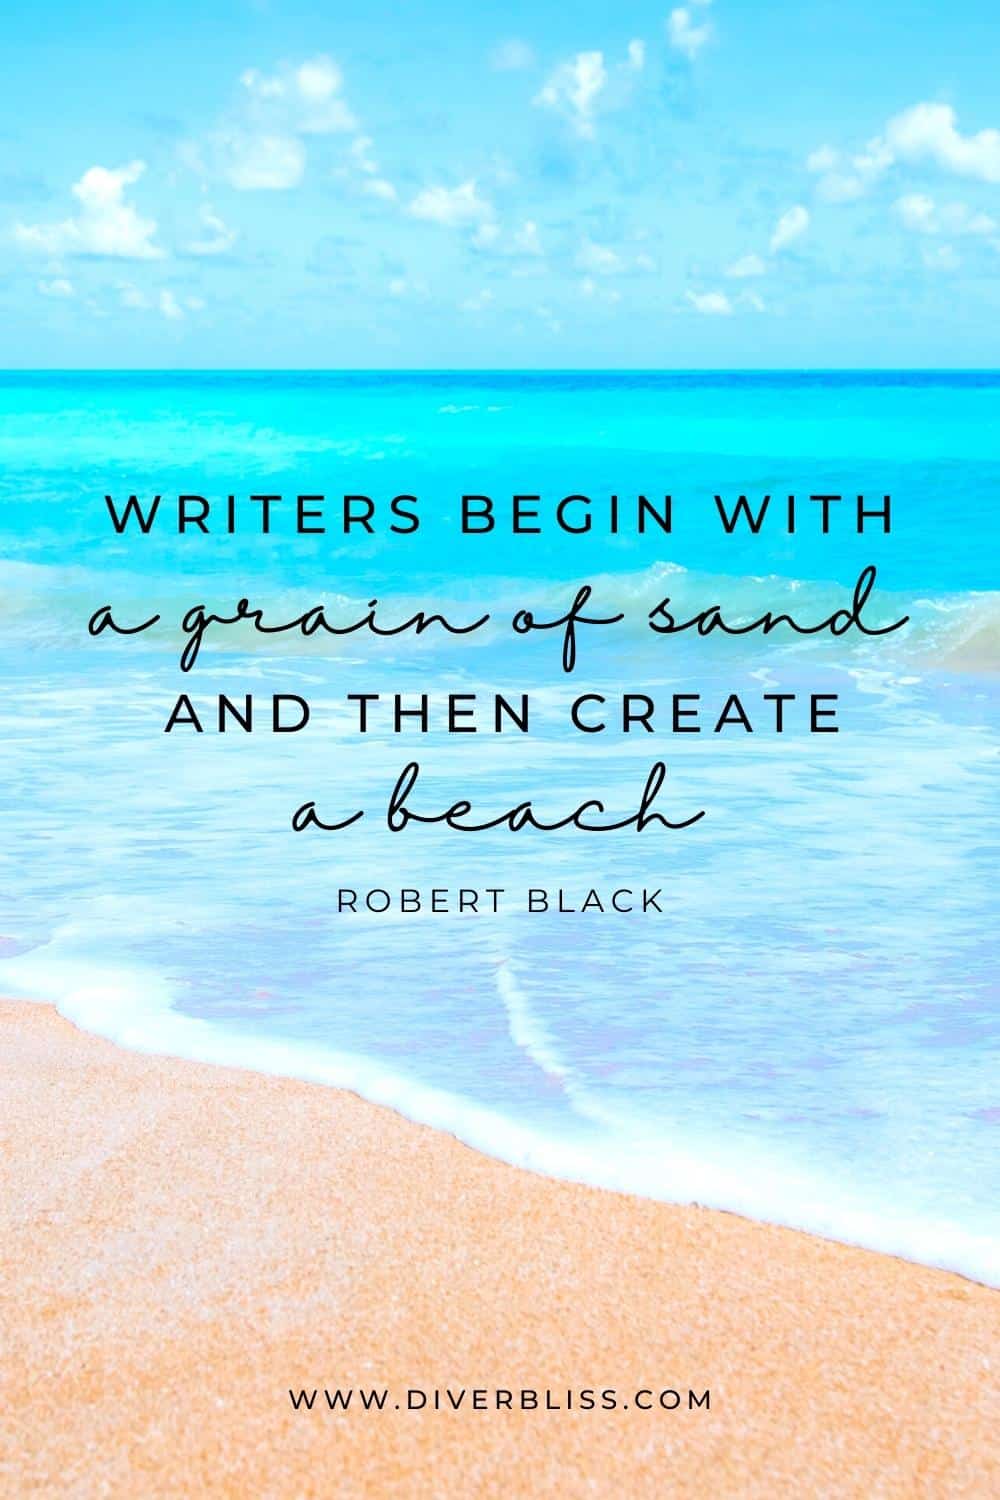 "Writers begin with a grain of sand, and then create a beach." —Robert Black